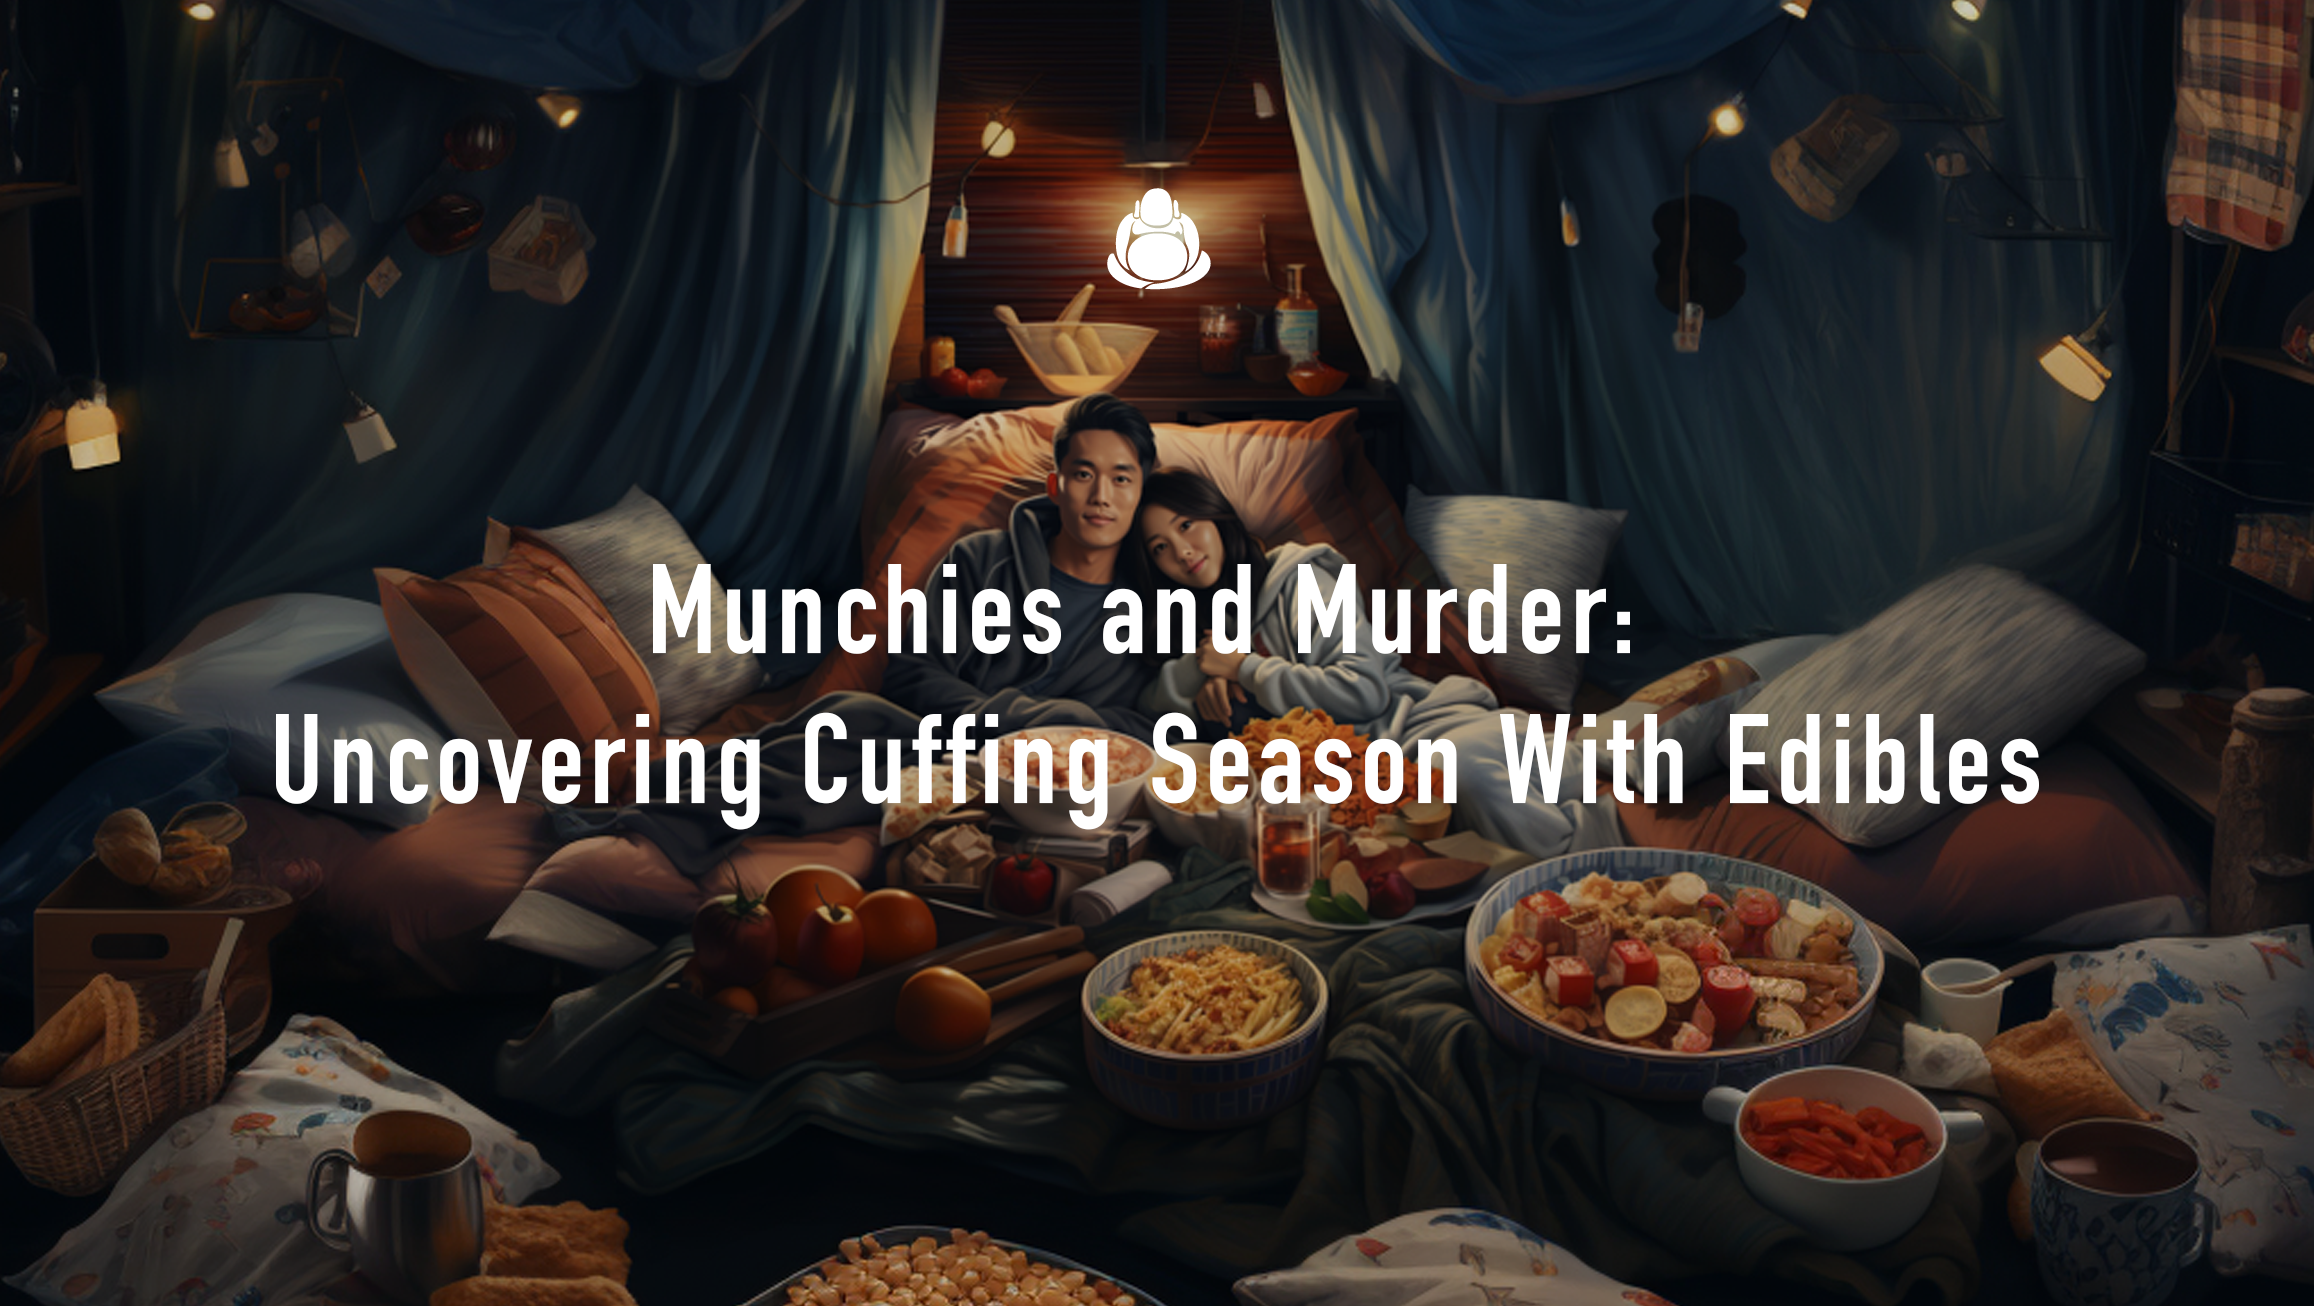 Munchies and Murder: Uncovering Cuffing Season With Edibles